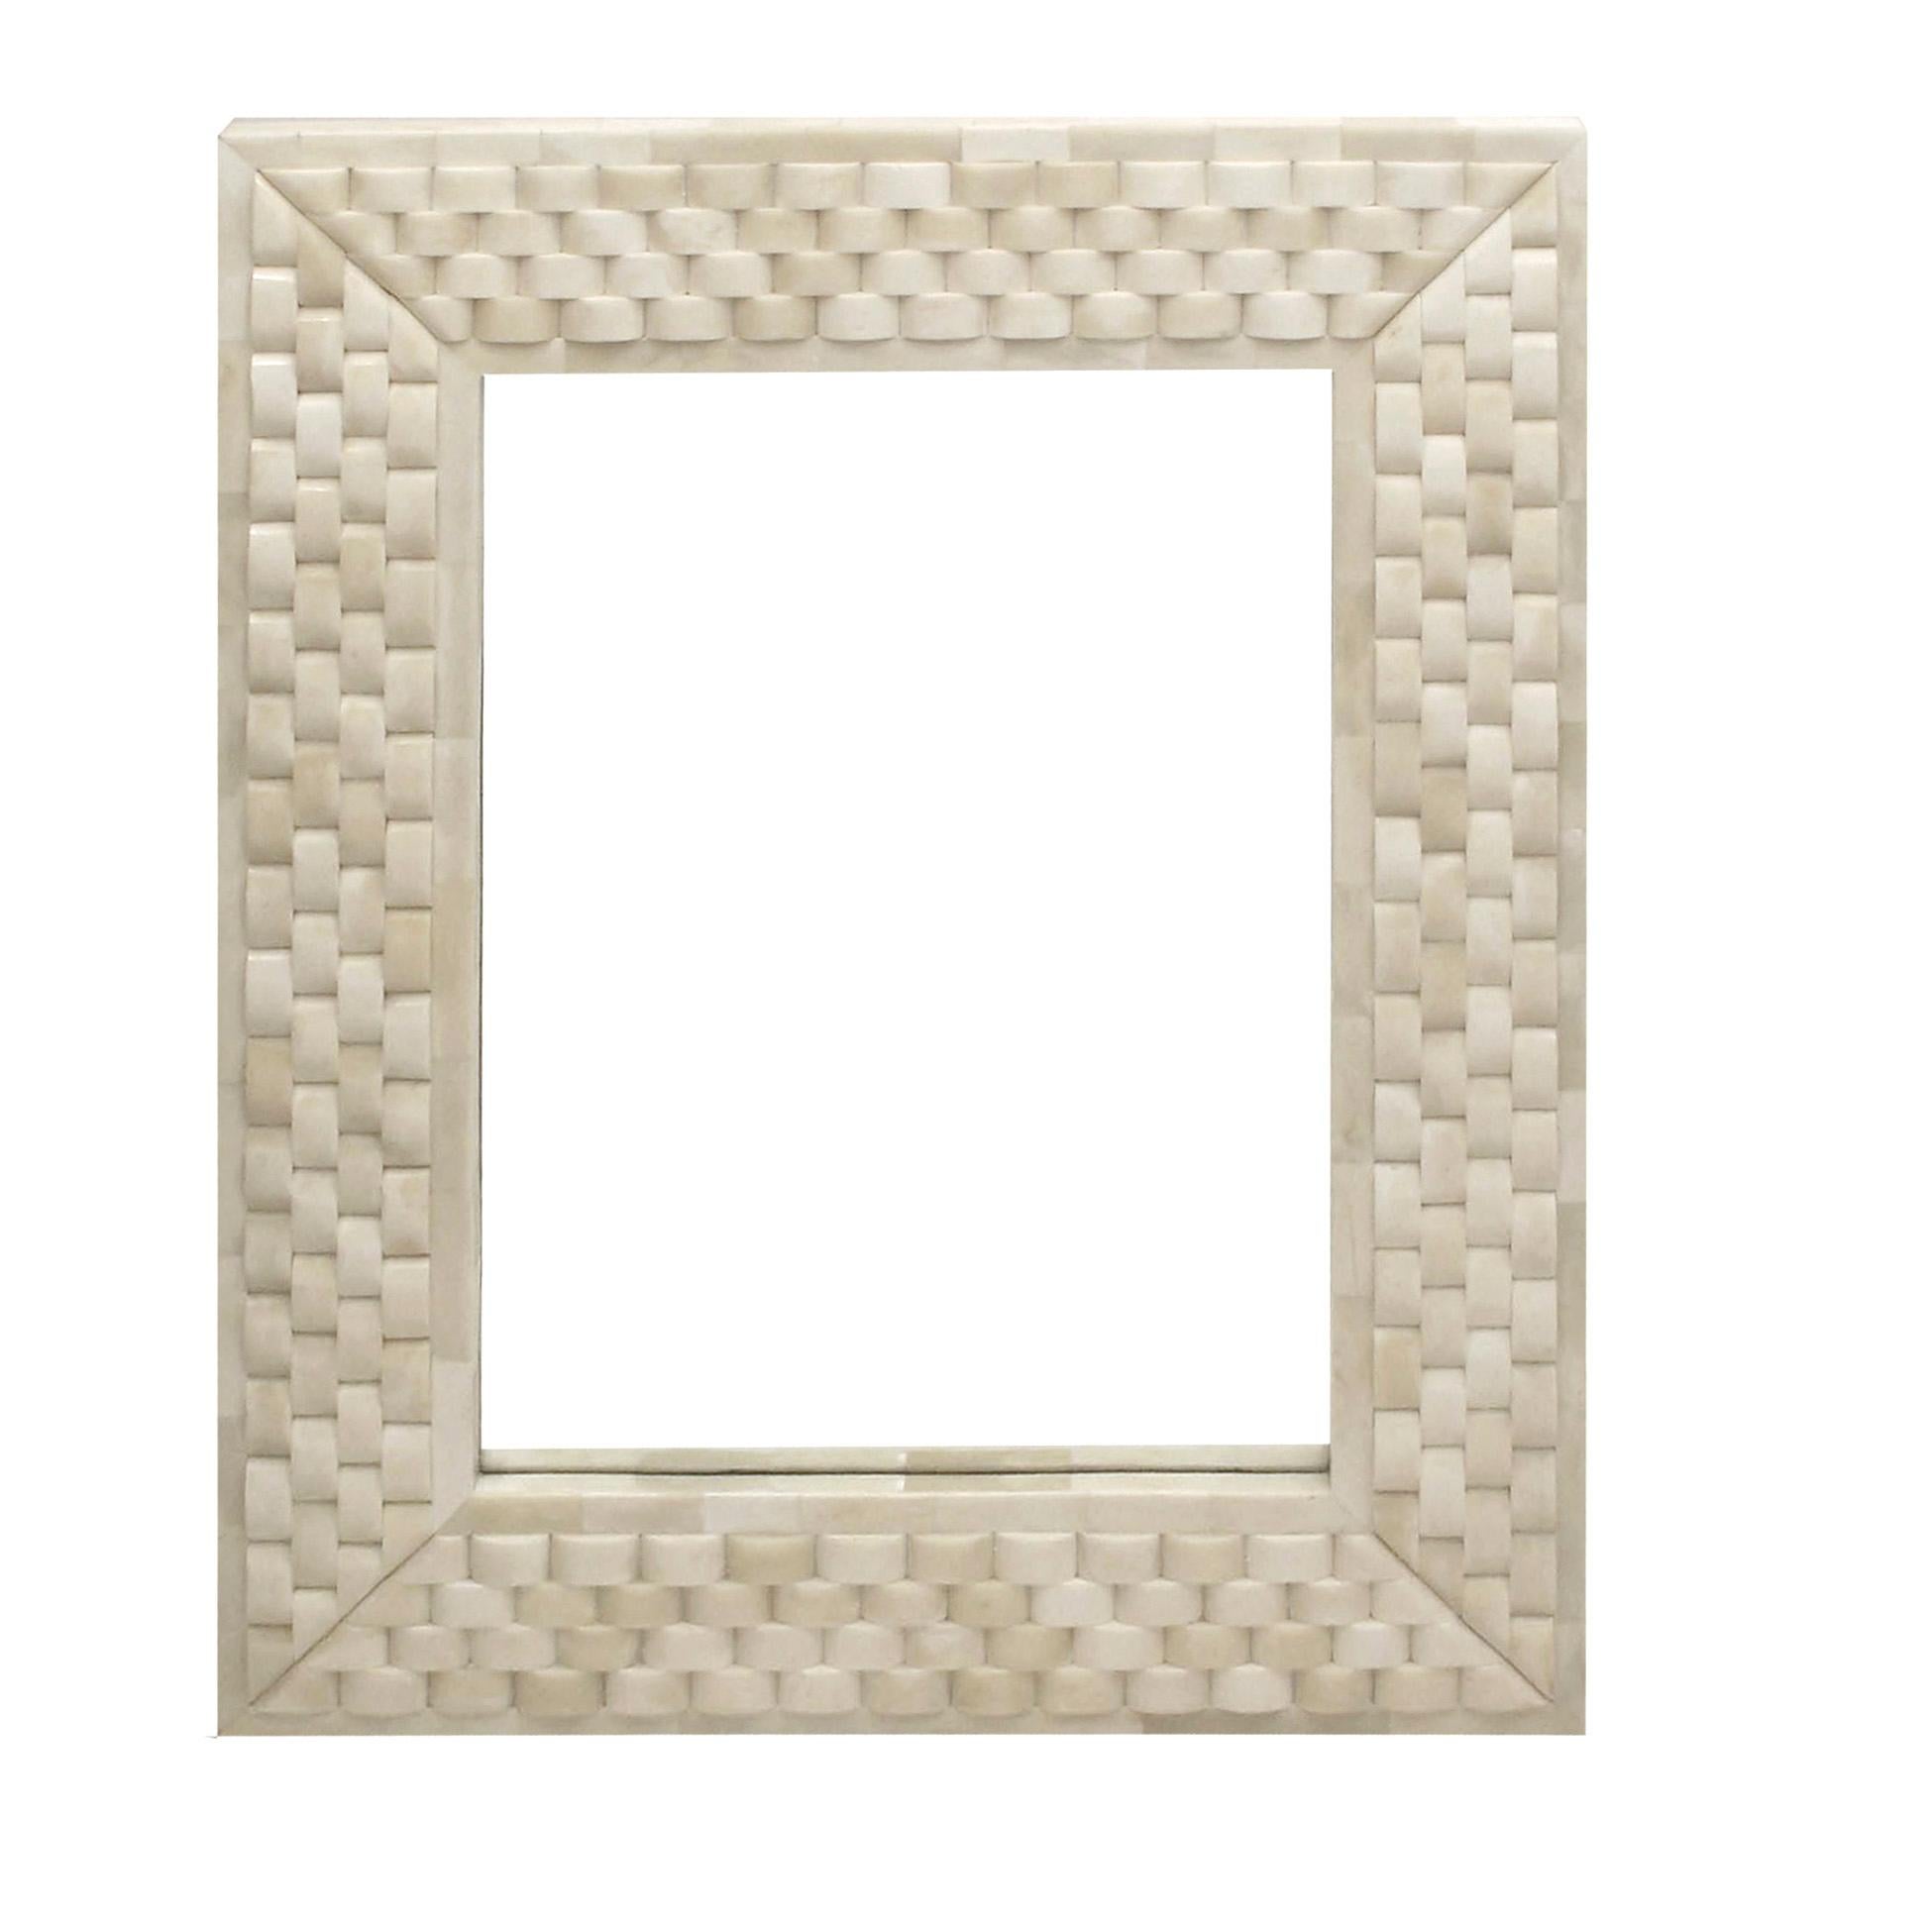 The weave mirror boasts an innovative application of sustainable camel bone. Meticulously carved into a unique concave shape, each chip is hand placed in alternating patterns so that the frame appears to be woven. Comes with a high-shine